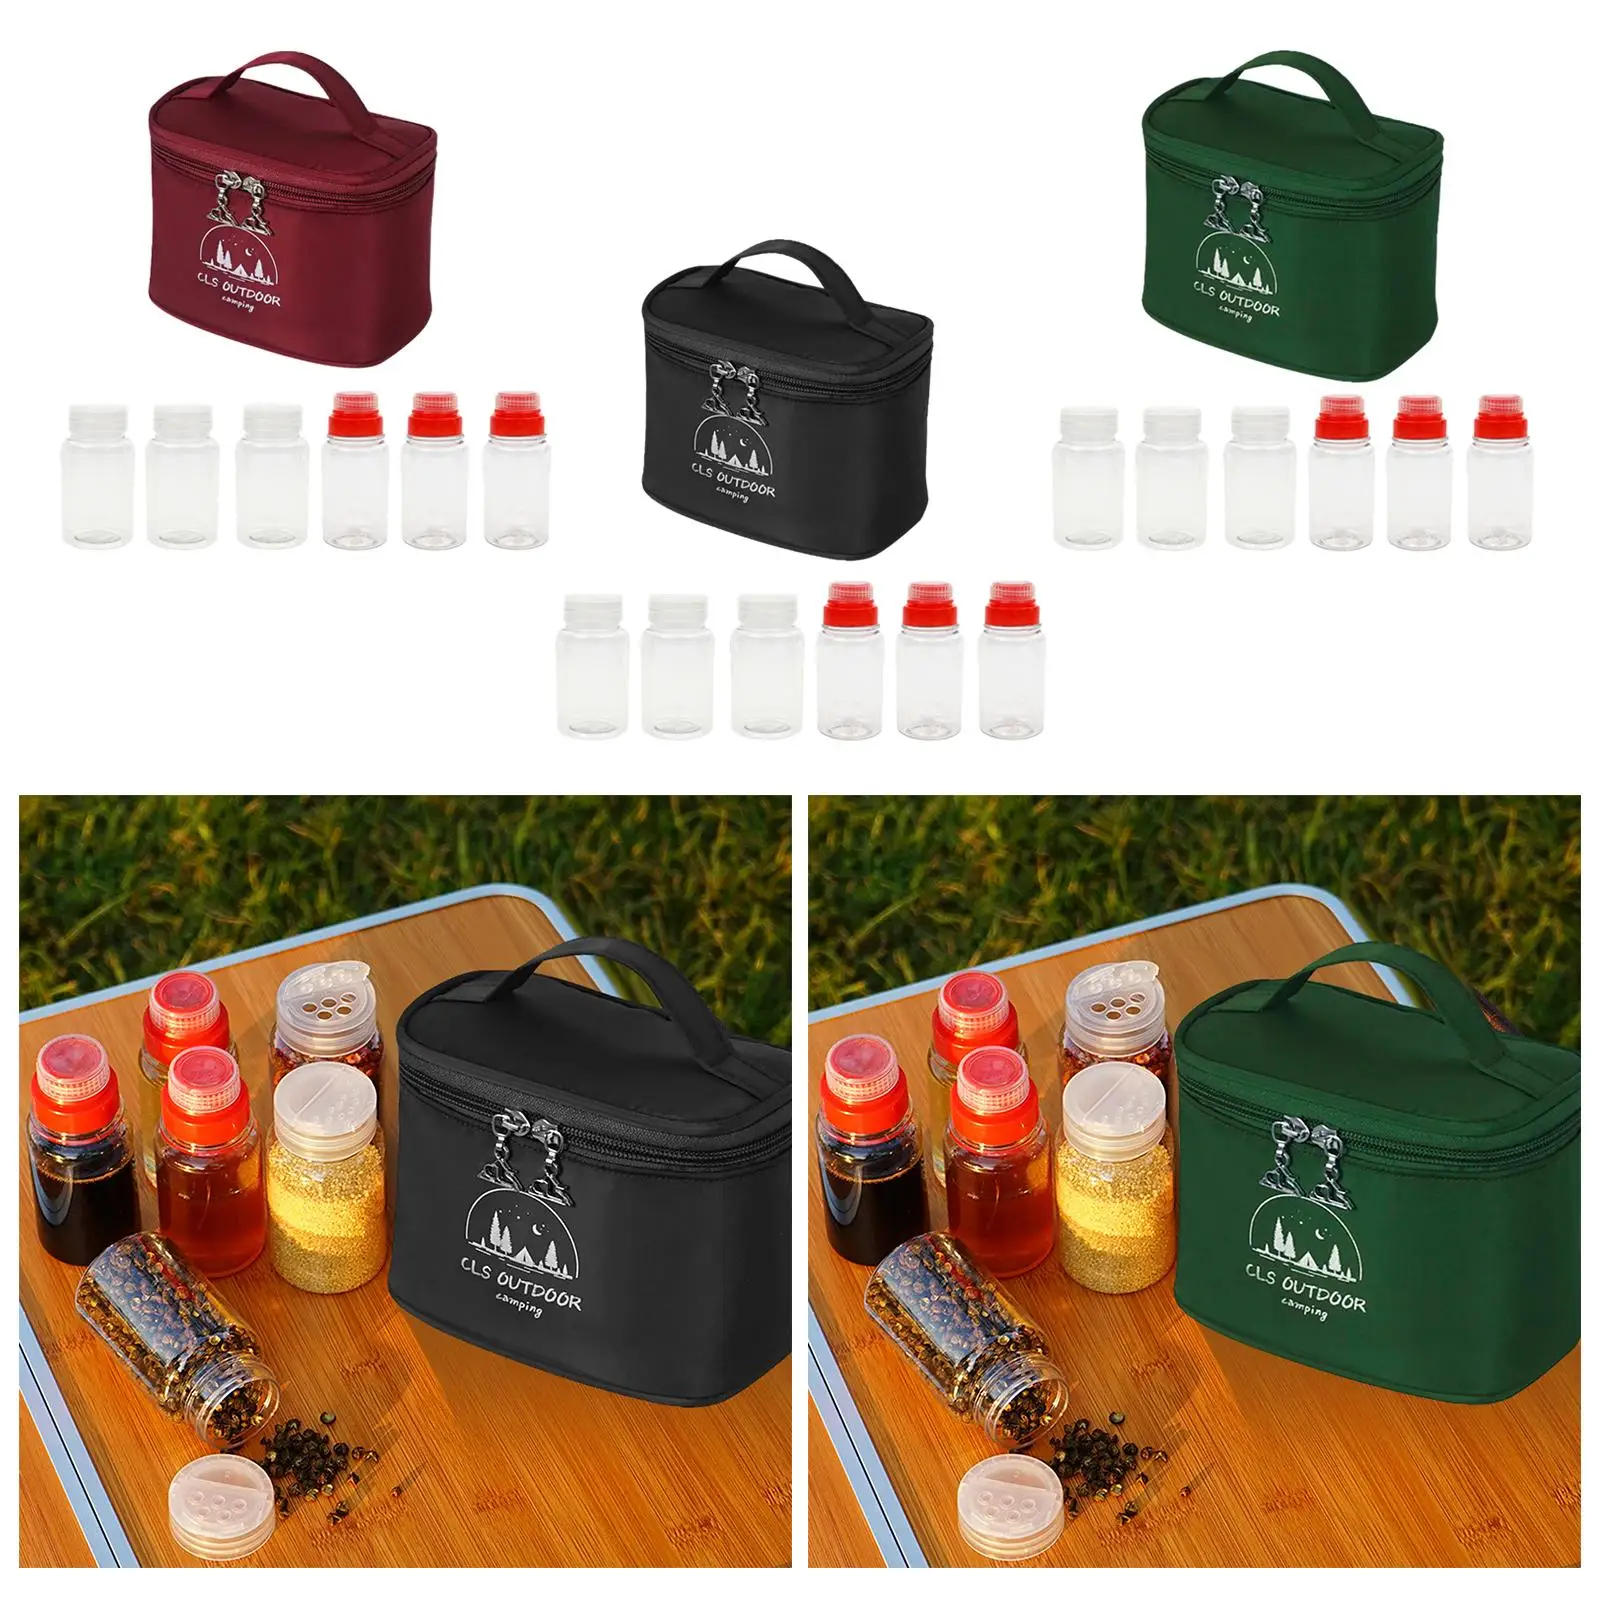 Spice Sauce Condiment Bottles Pepper Seasoning Pot For BBQ Camping Outdoor Salt And Pepper Jar Herb Spice Tool Portable